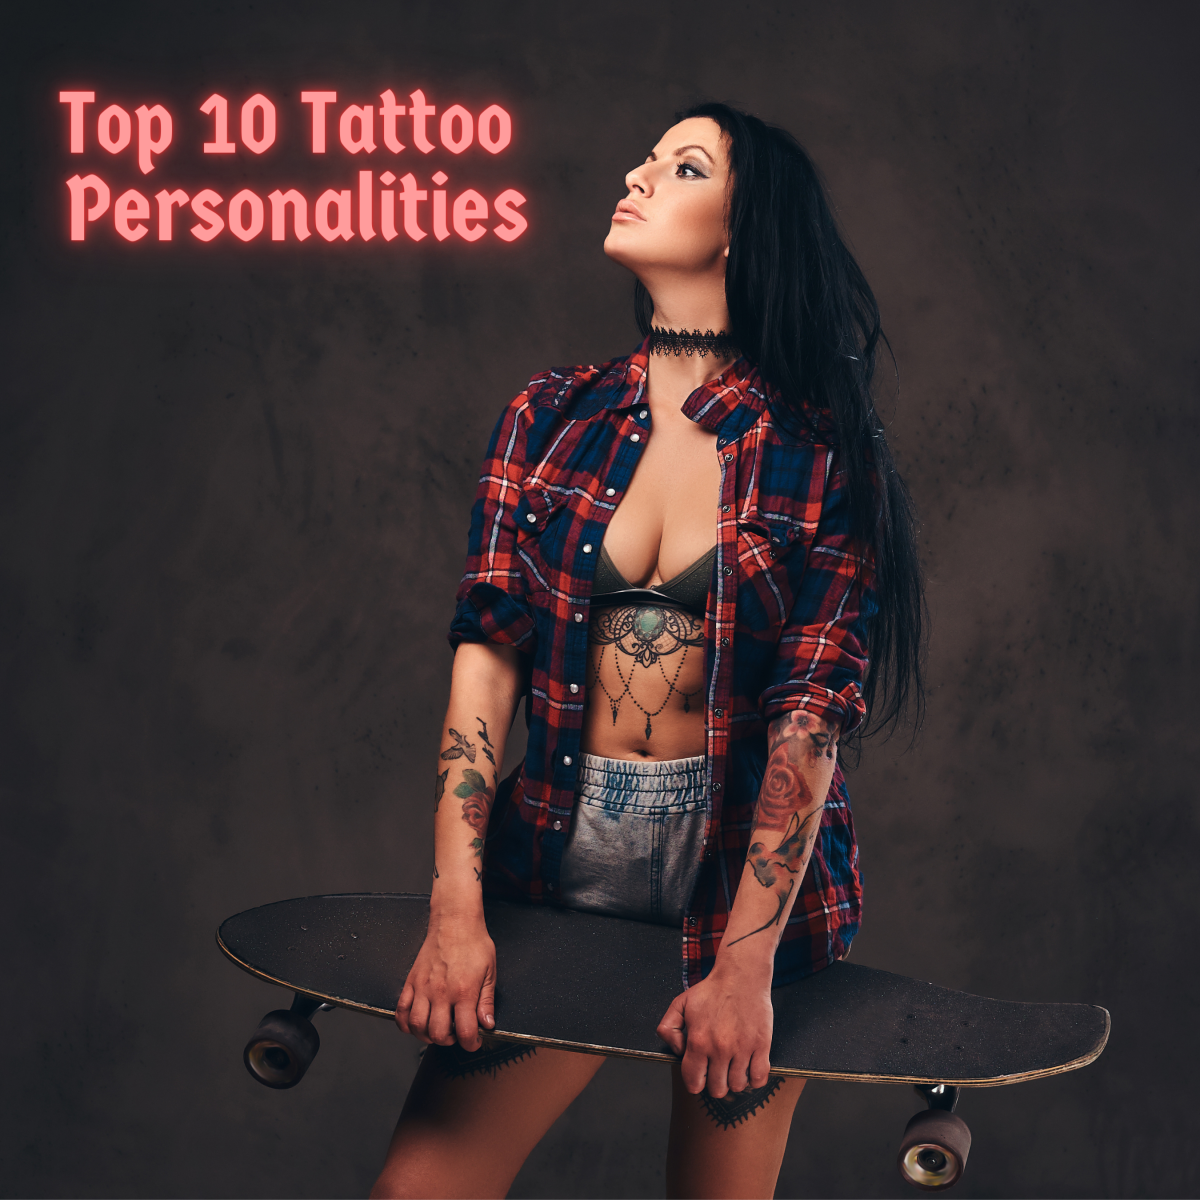 10 Most Popular Tattoo Personalities in the World